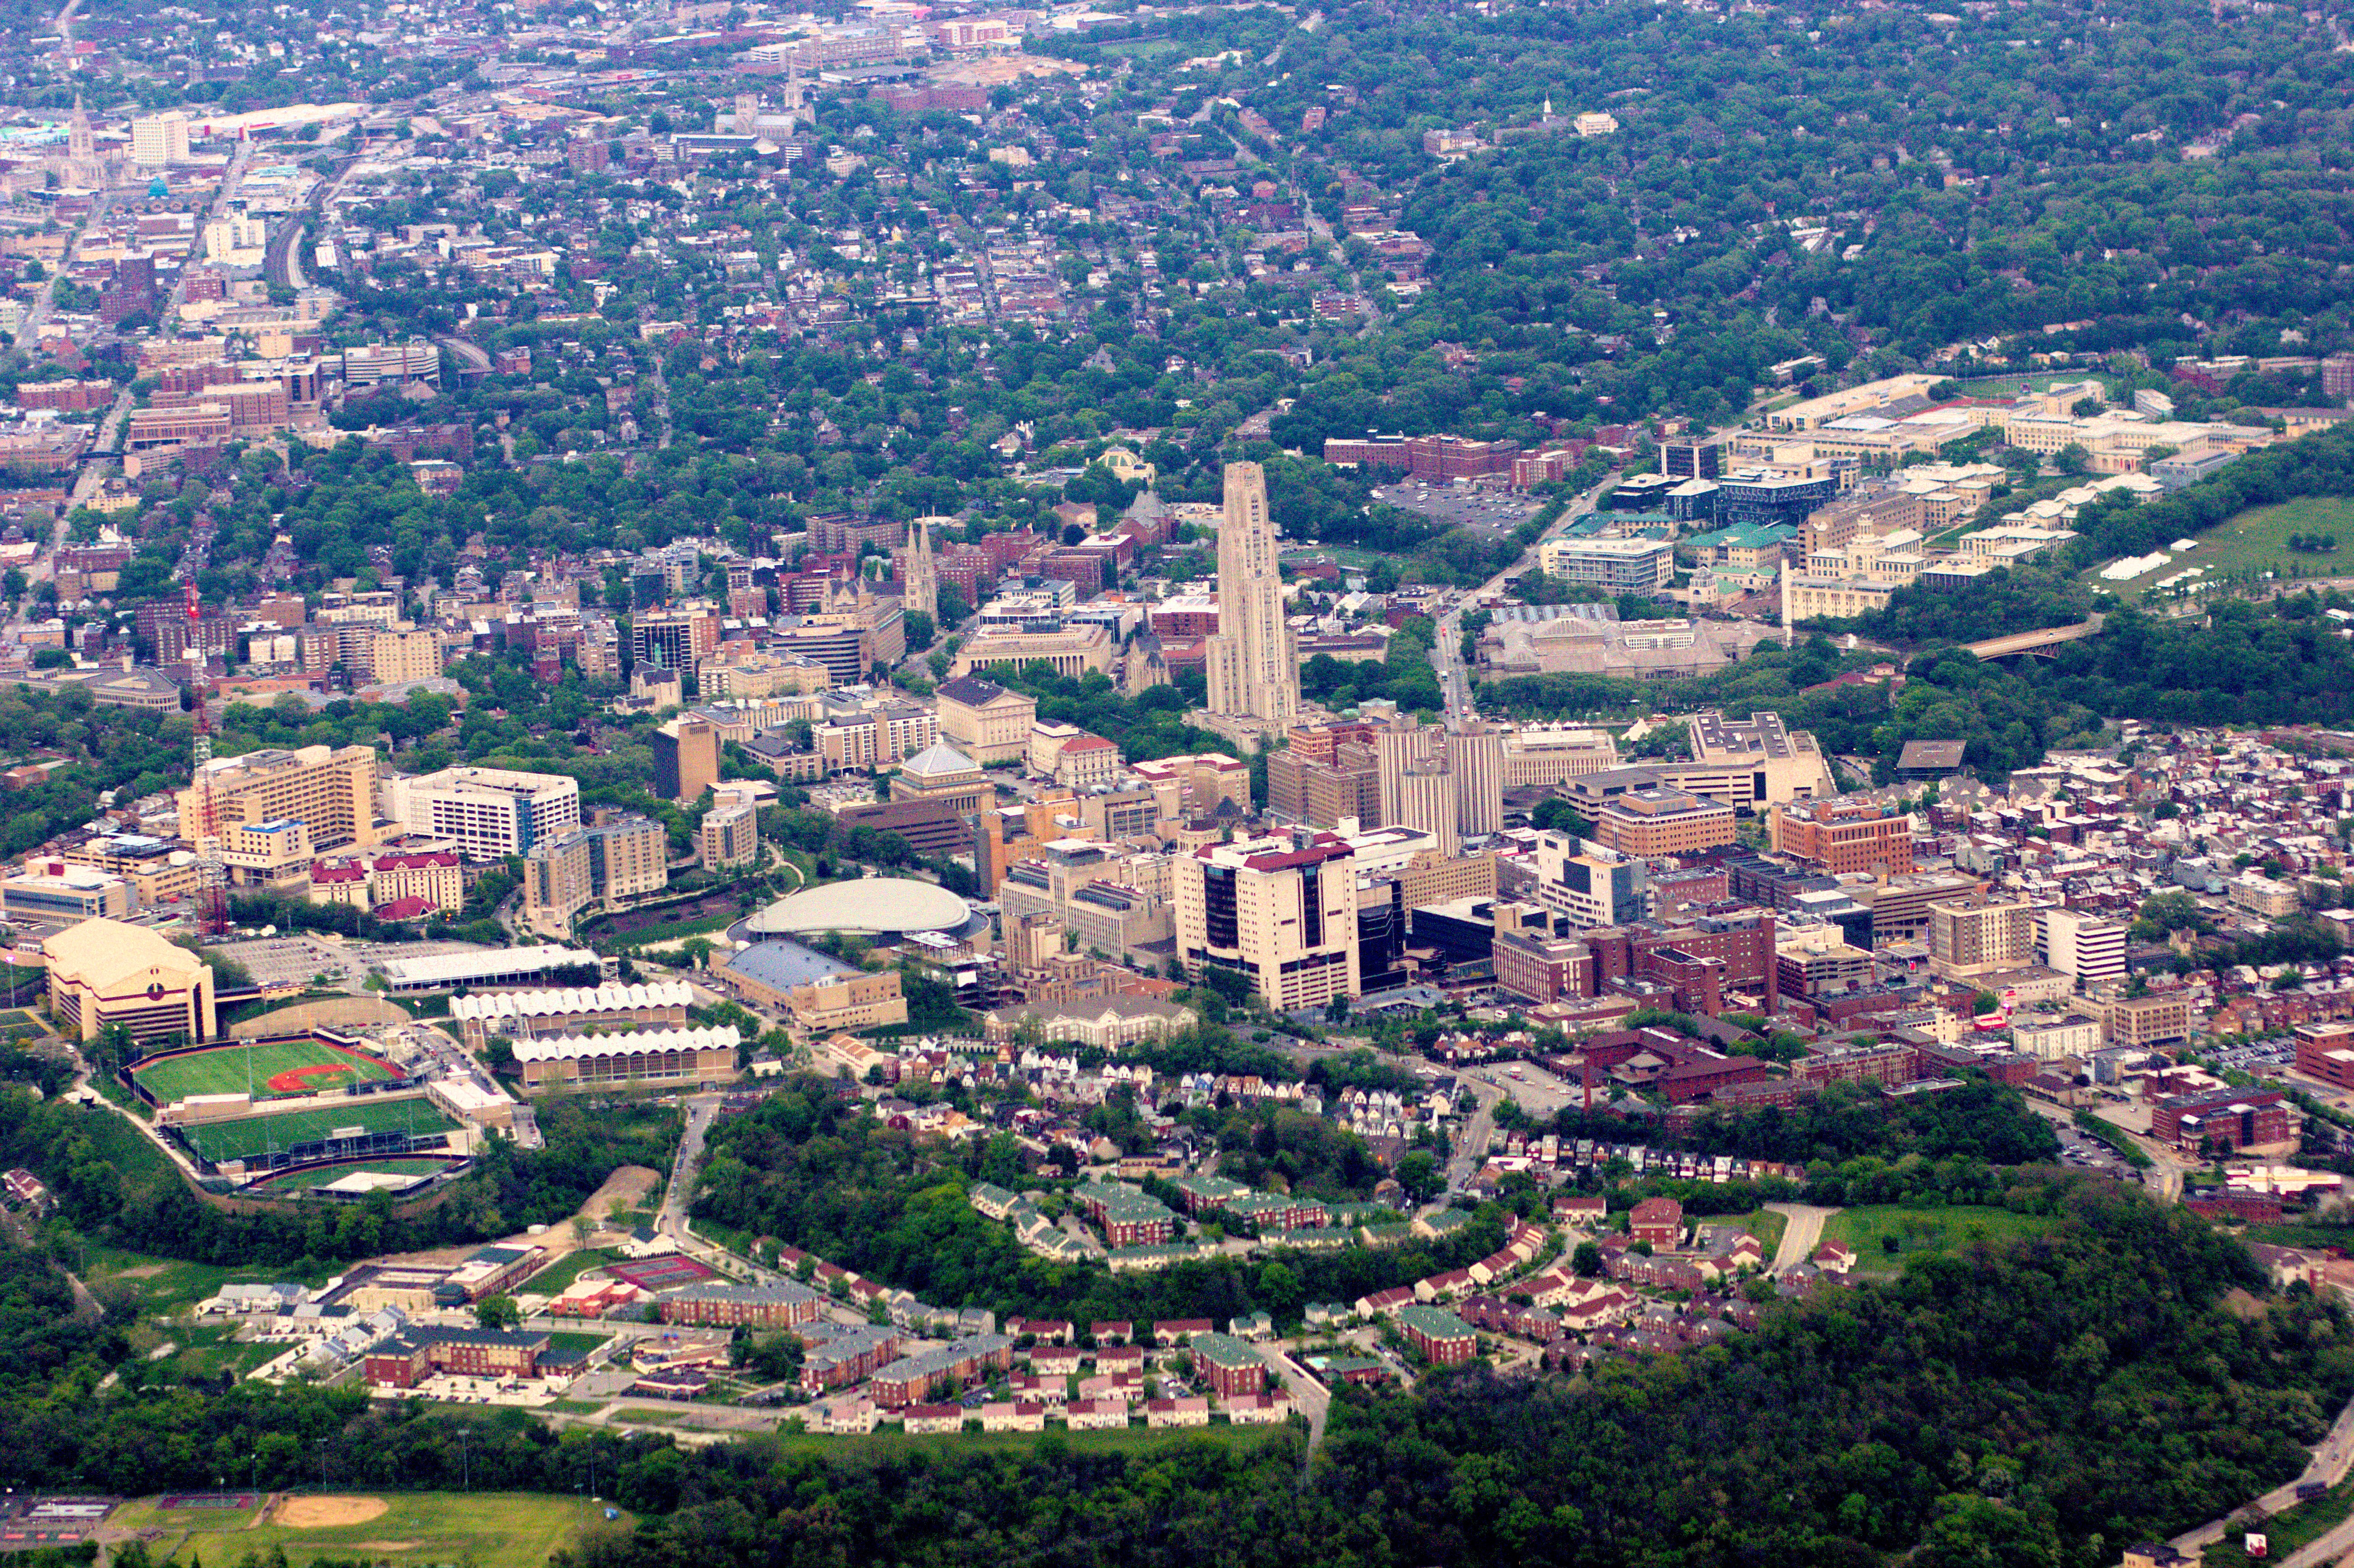 Oakland_(Pittsburgh)_from_the_air.jpg